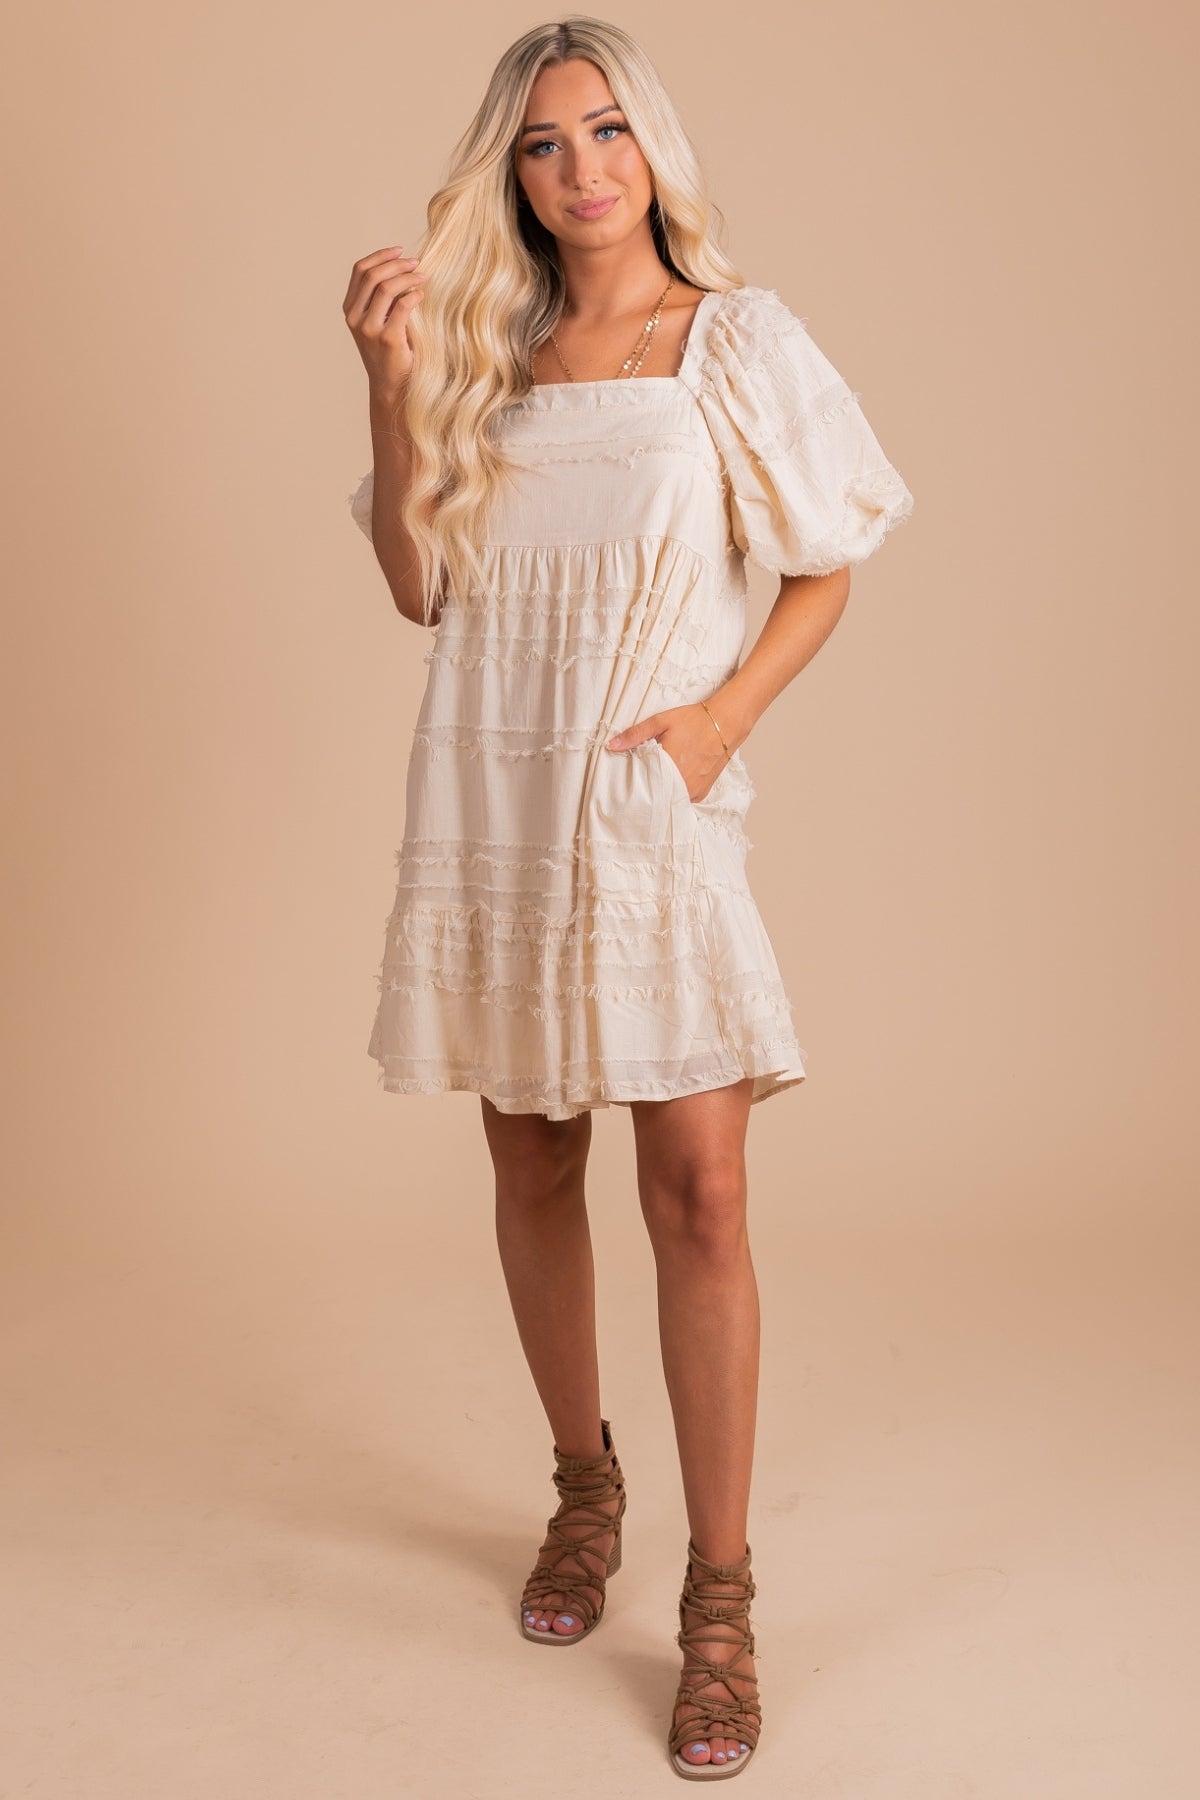 Beige Colored Mini Dress with Short Puff Sleeves